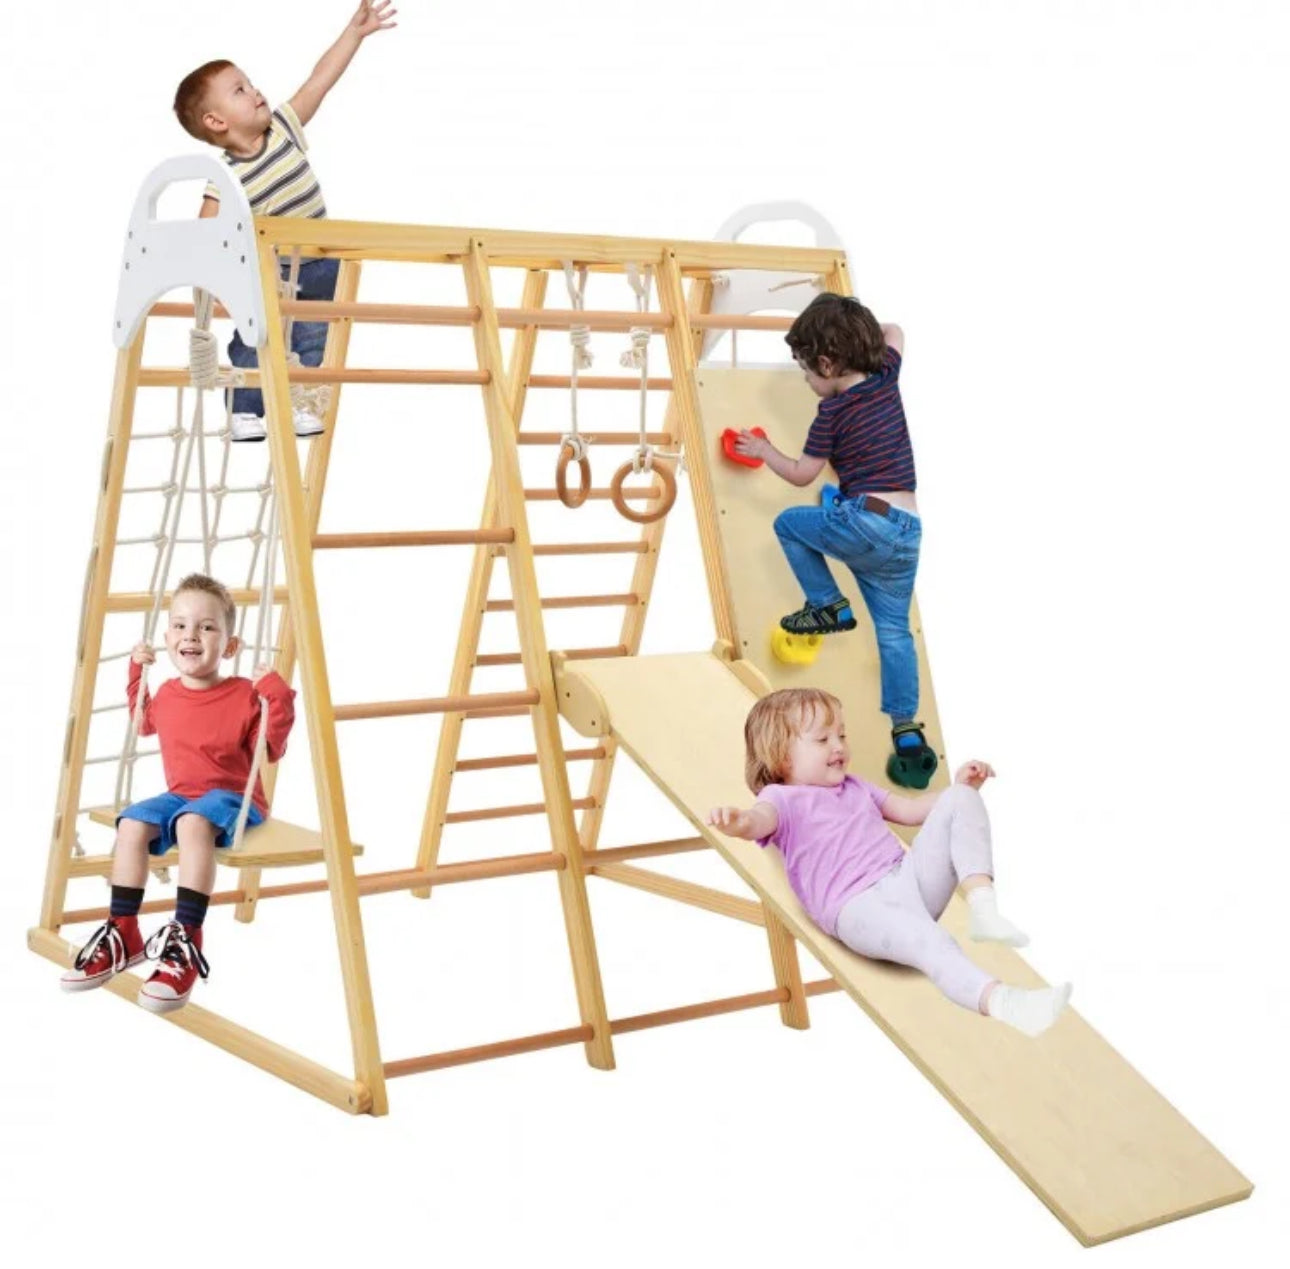 Super Cool Wooden 8-in-1 Kids Jungle Gym Playground | Monkey Bars | Climbing | Ladder | Swing | Rings | Slide | Holds 530lbs | Playground